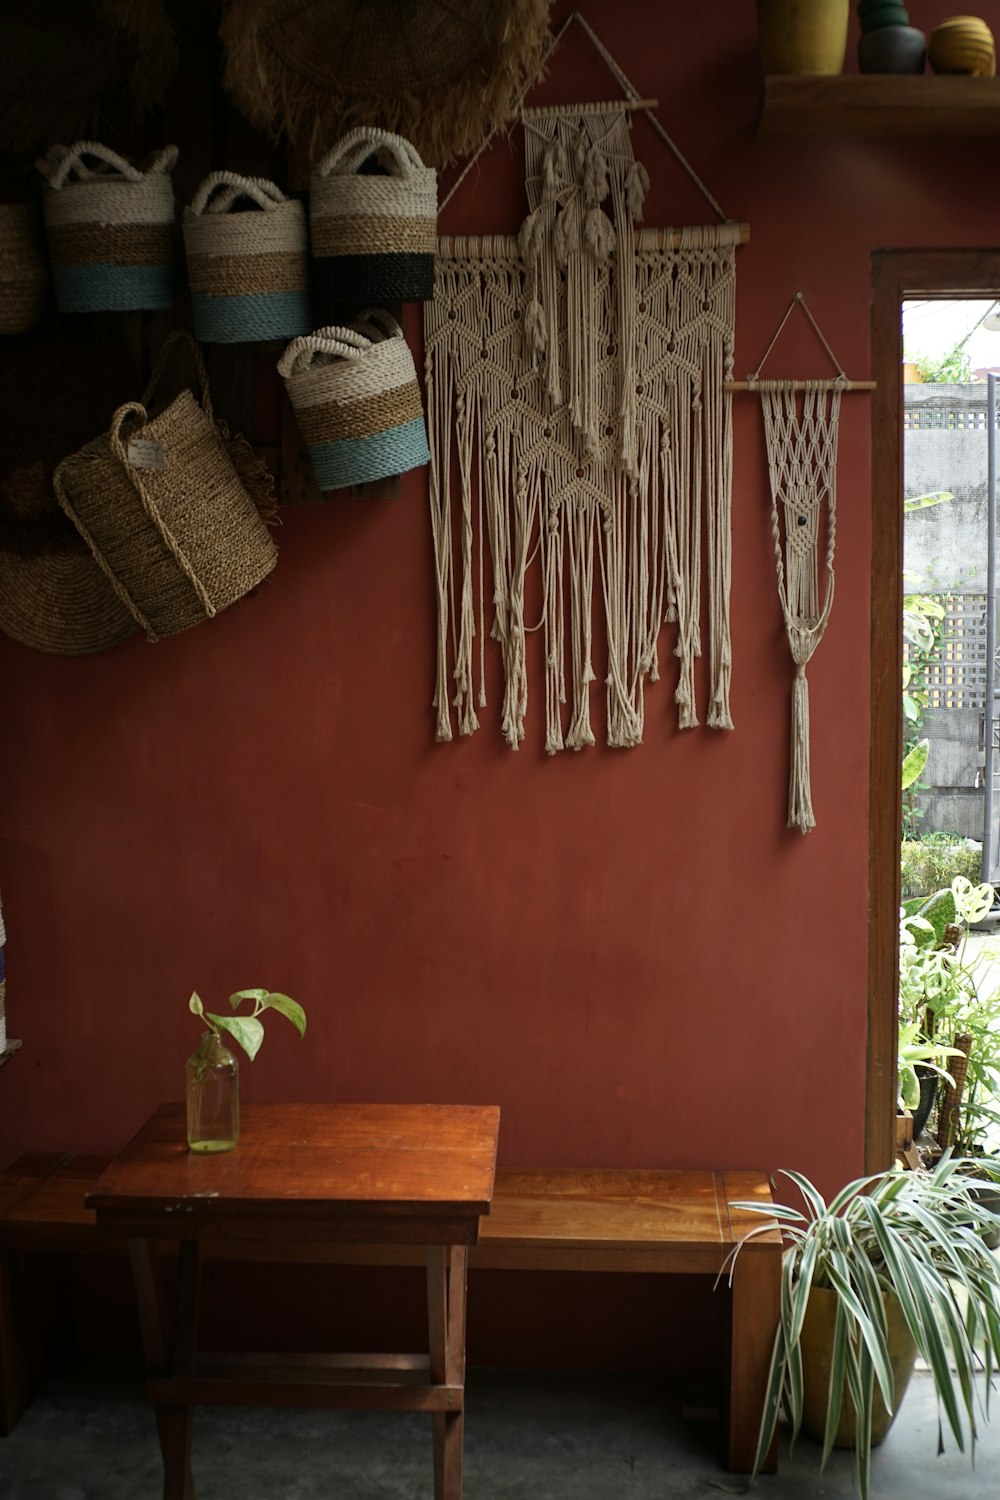 a room with a wooden table and hanging baskets on the wall